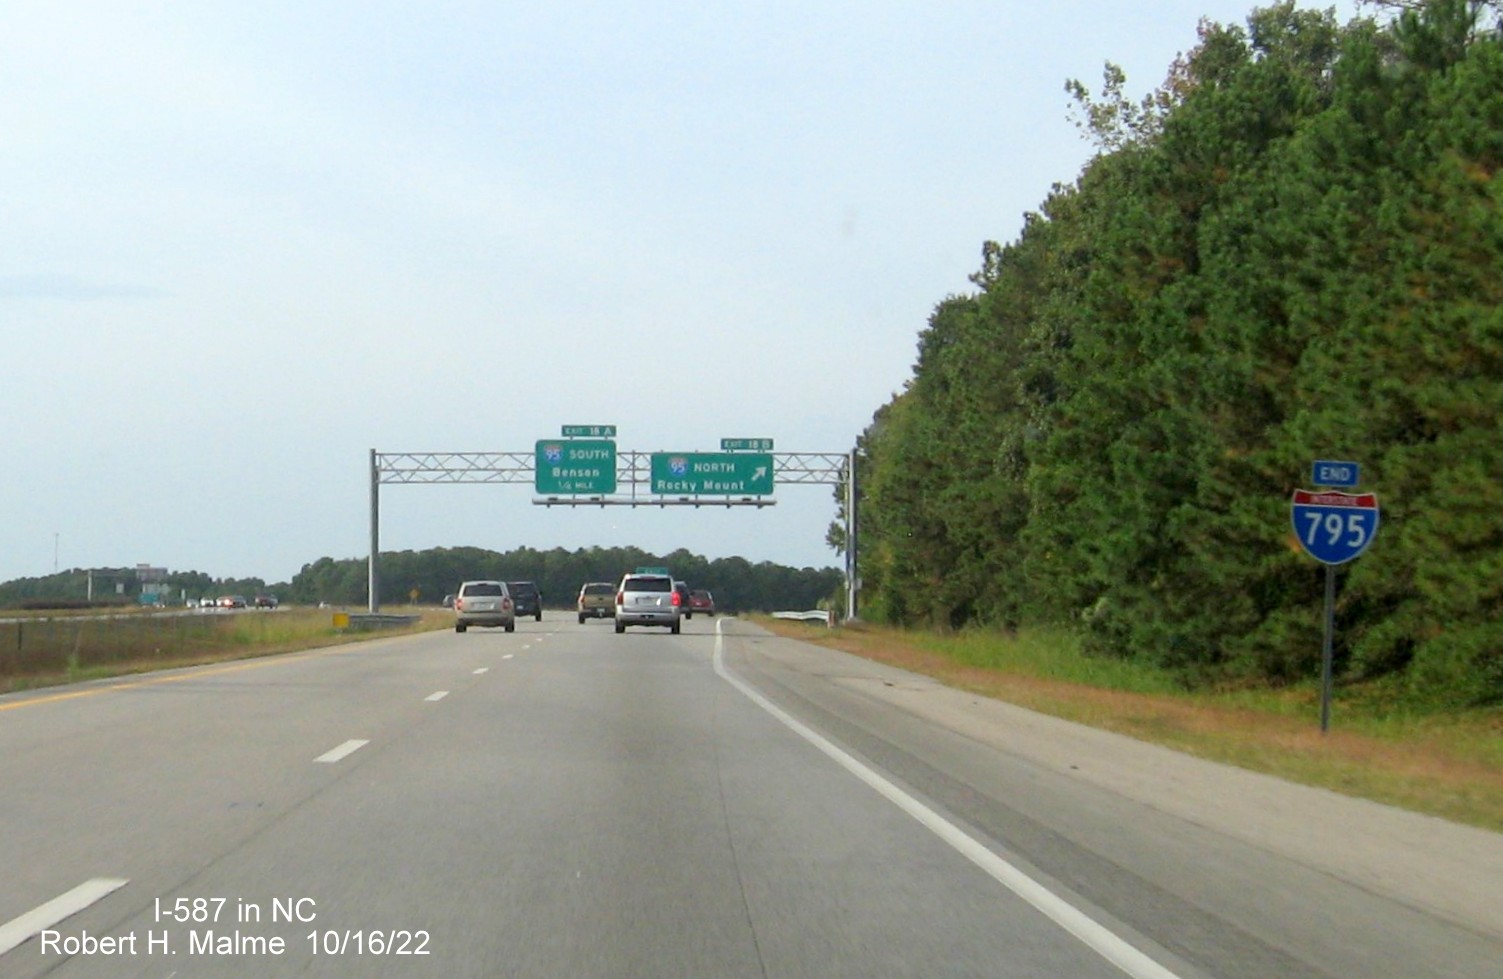 Image of End I-795 sign in front of overhead signs for I-95 exits with new I-587 exit numbers on I-587 West/I-795 North in Wilson, taken from opposite lanes, Google Maps Street View, August 2022